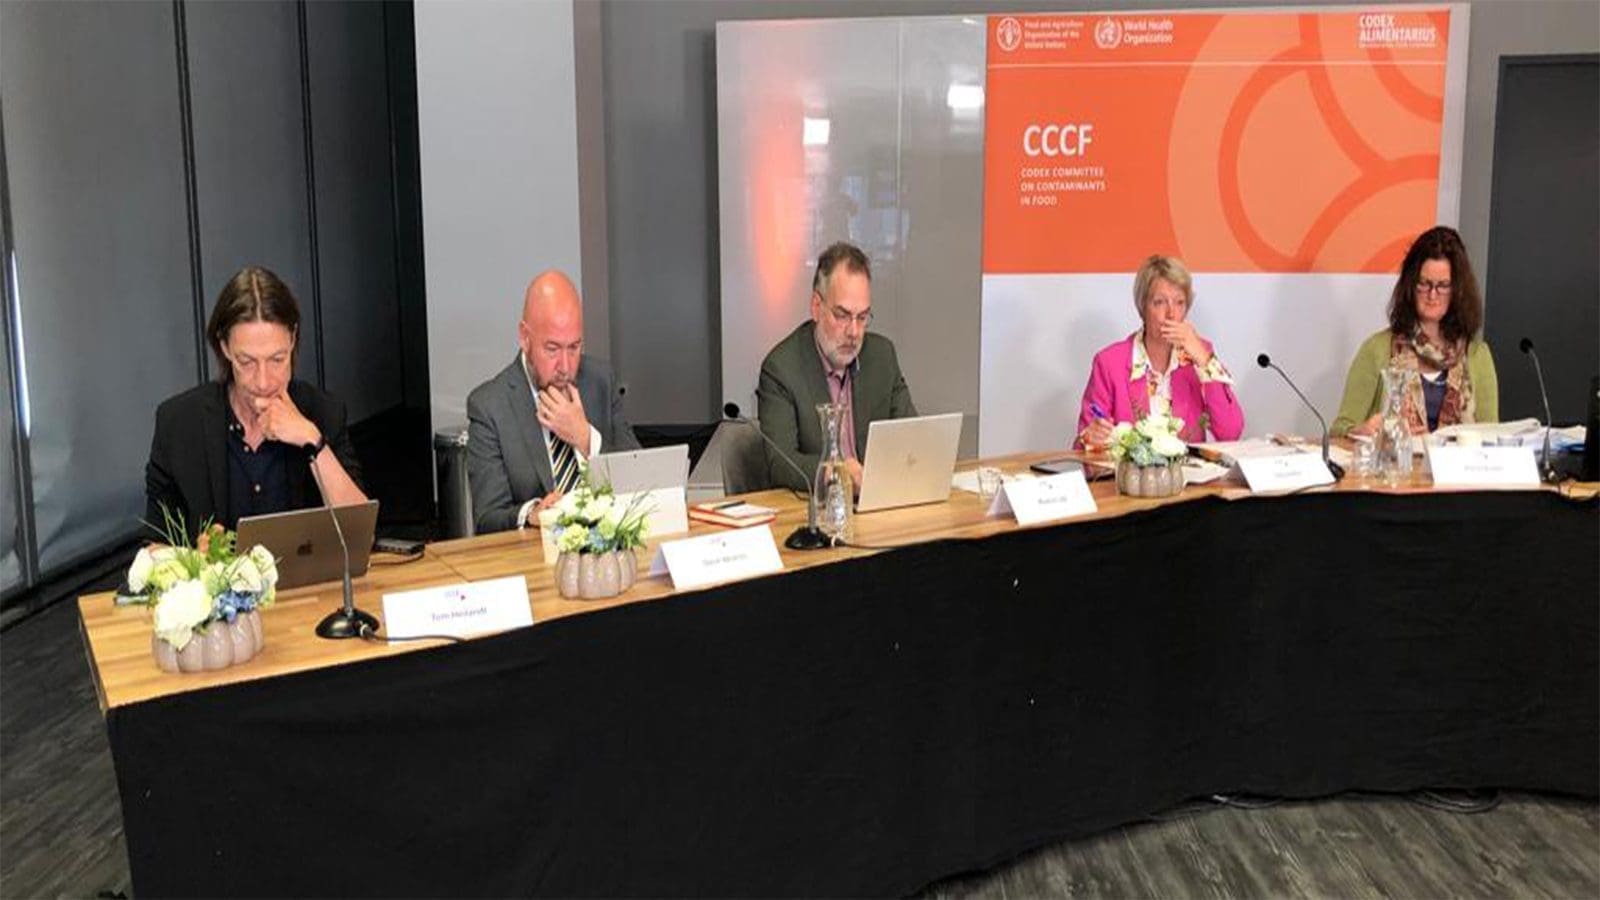 Codex Committee on Contaminants in food  convene 15th session